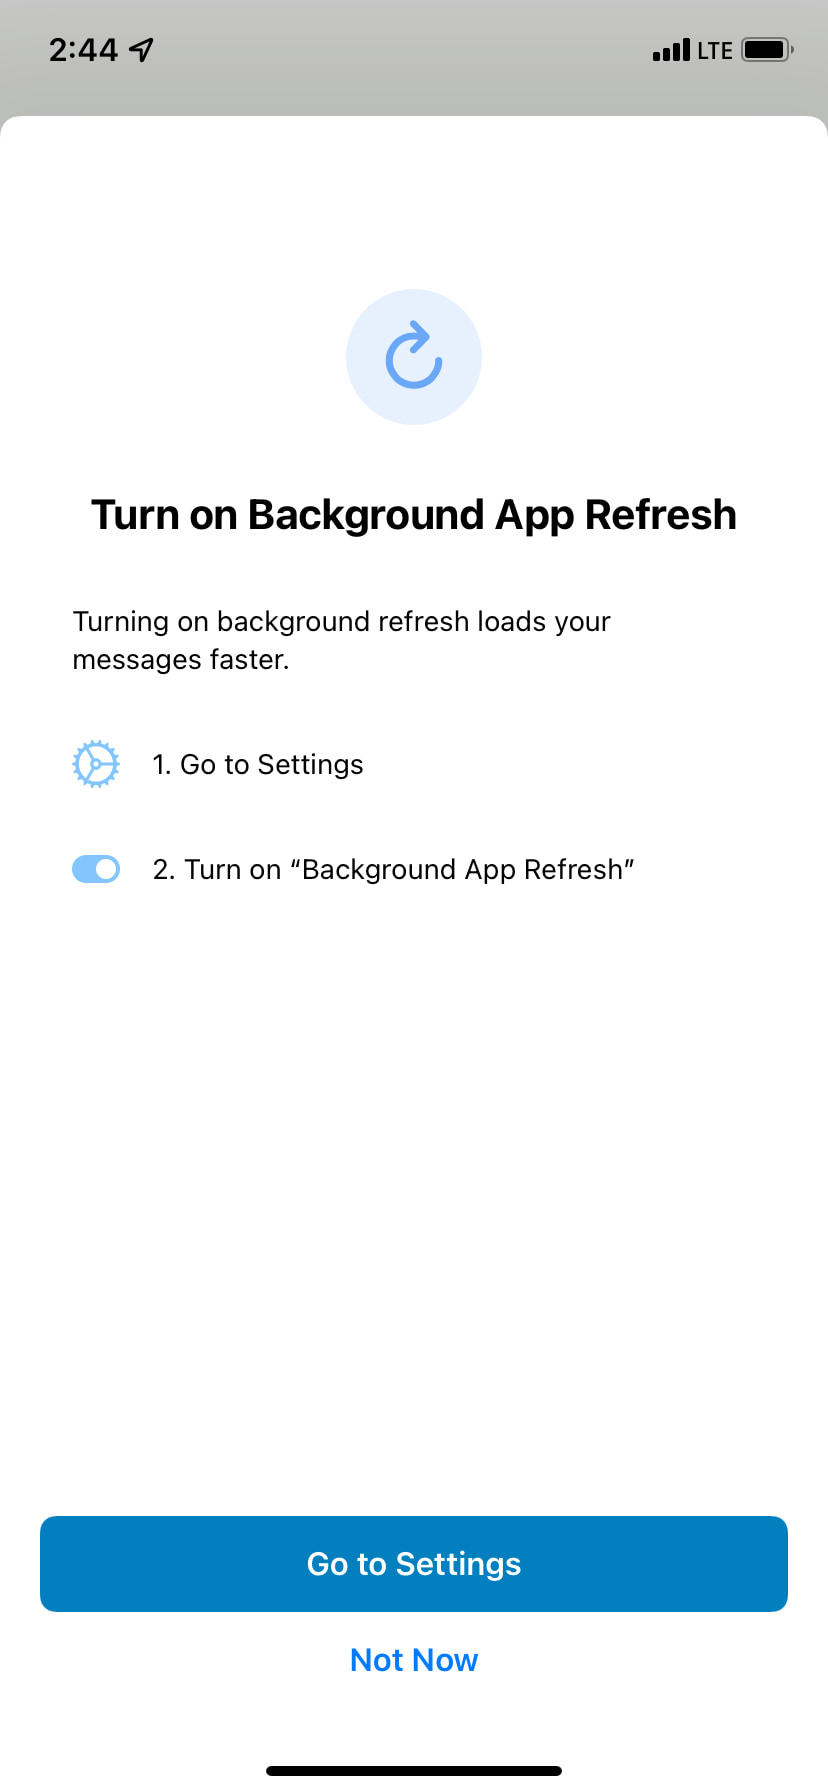 WhatsApp asking users to enable Background App Refresh on iPhone